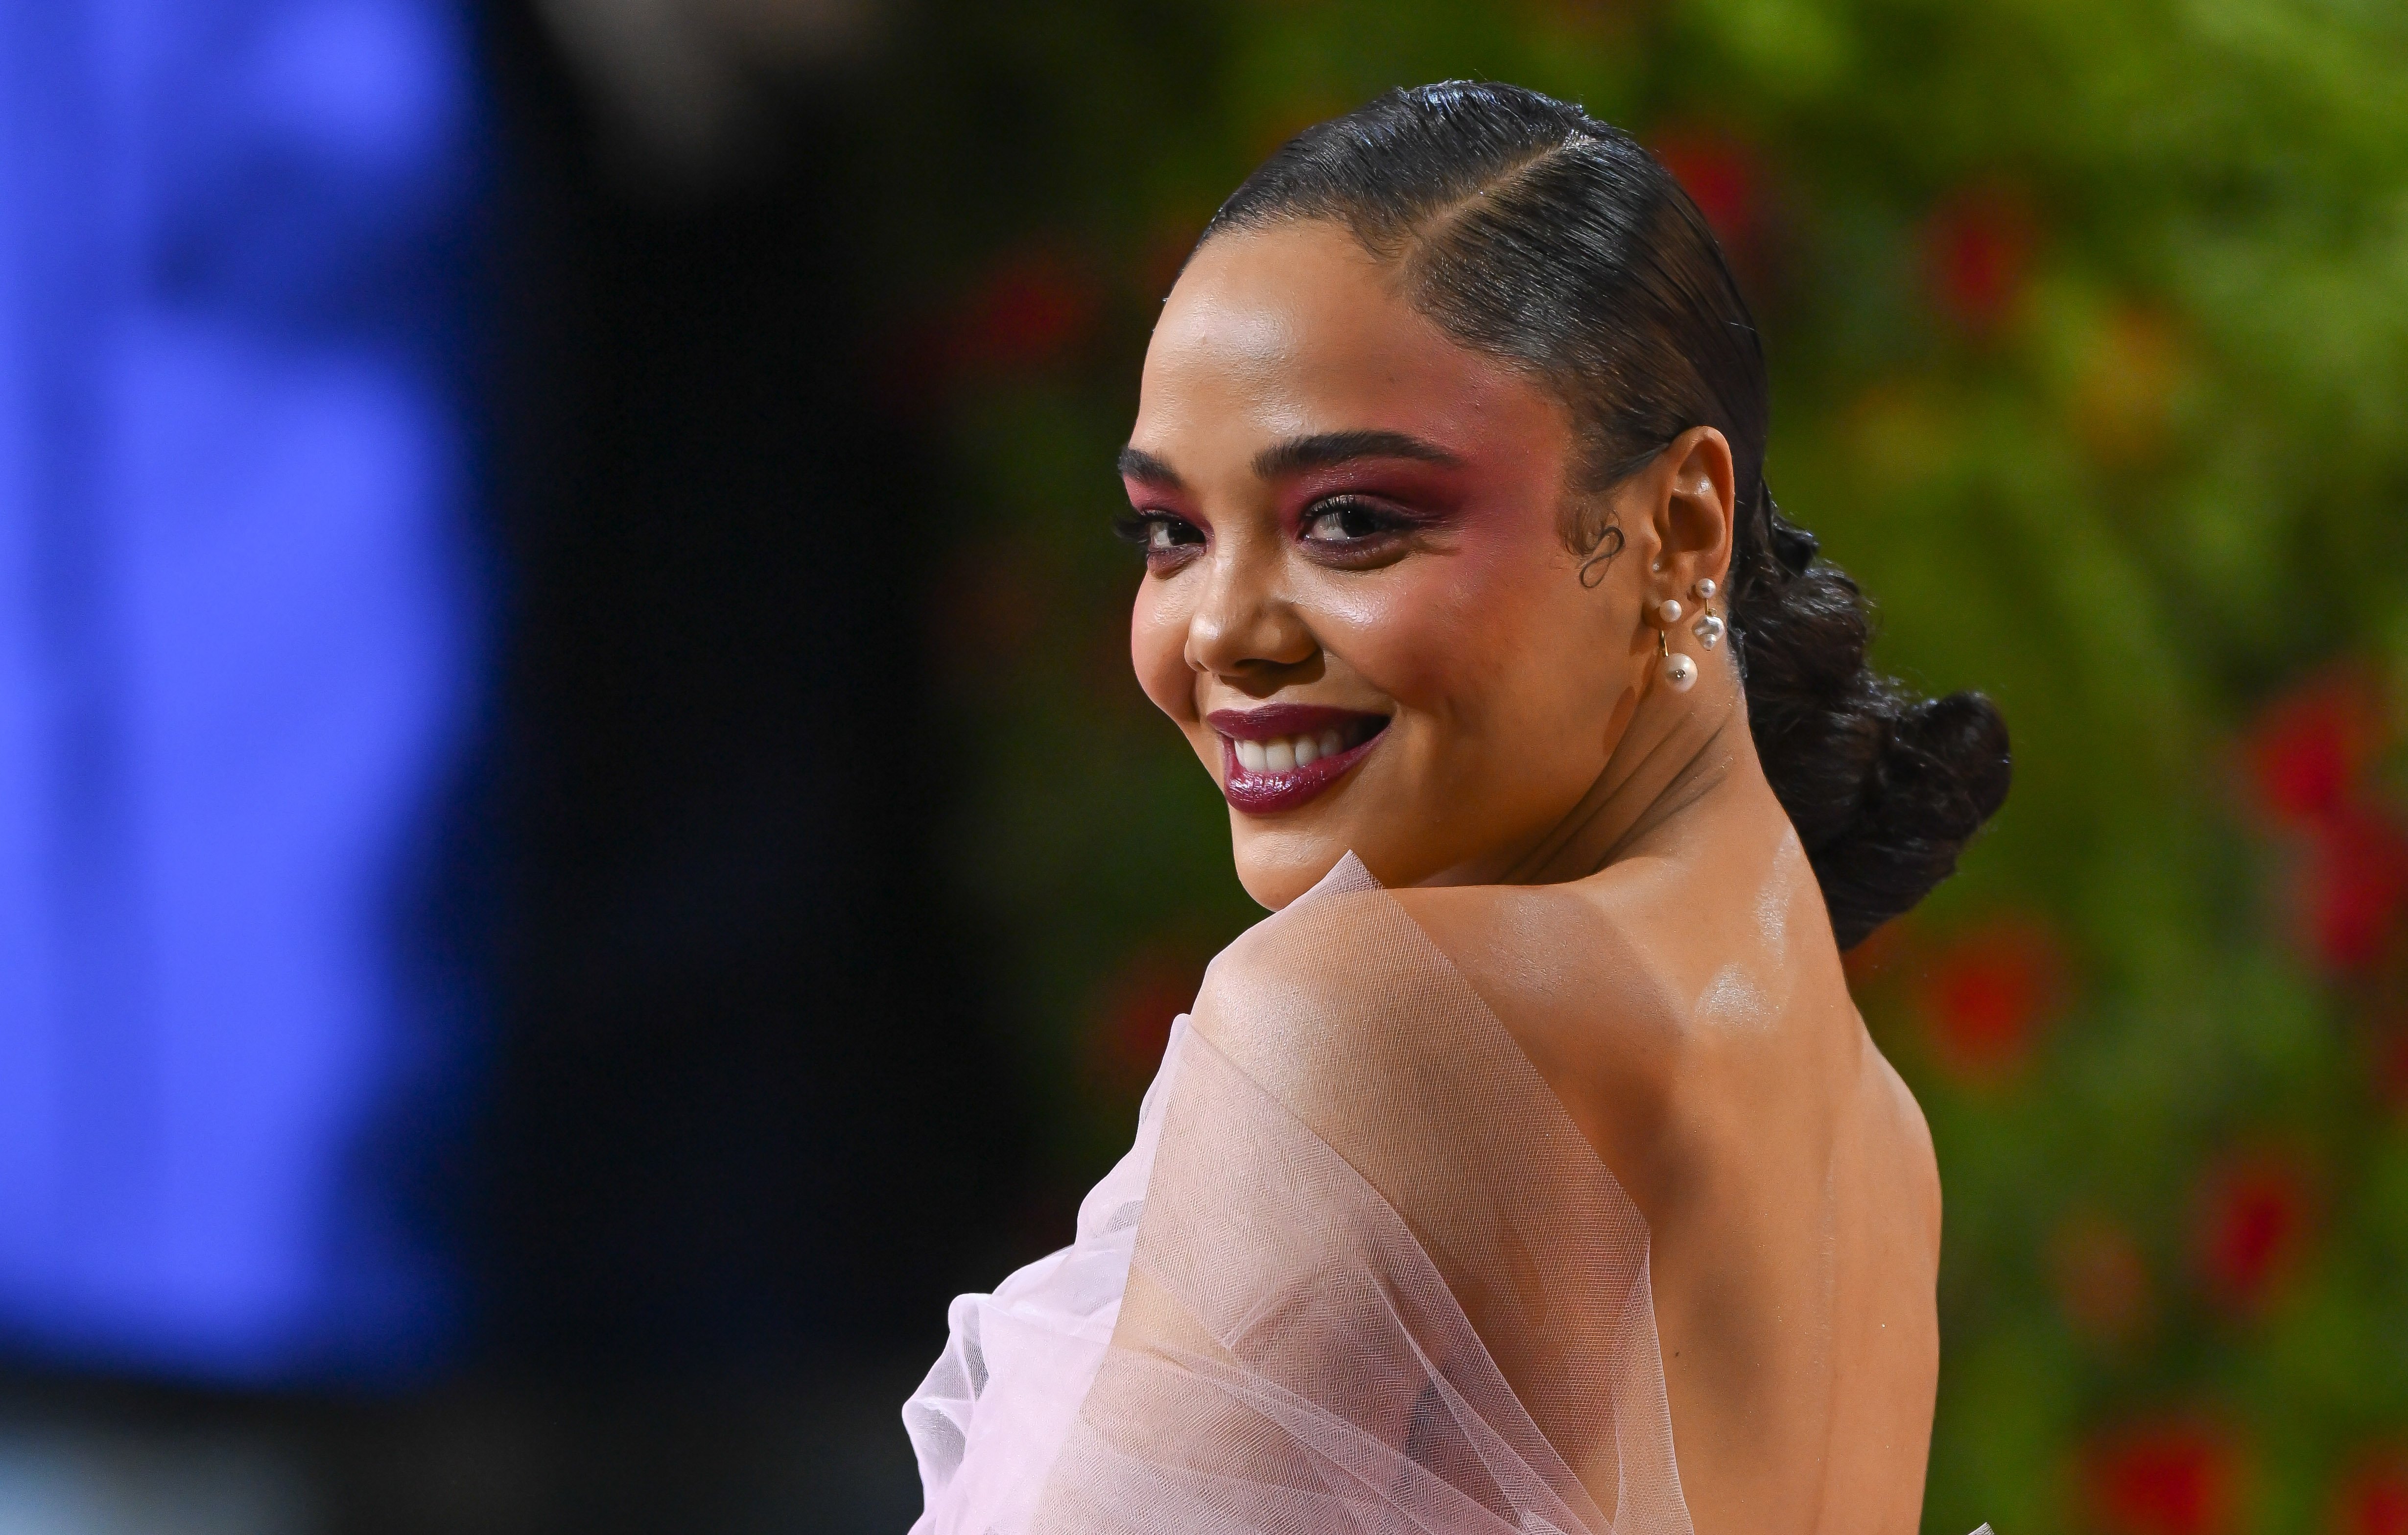 Tessa Thompson, who stars as Valkyrie in 'Thor: Love and Thunder,' wears a light pink tulle dress.